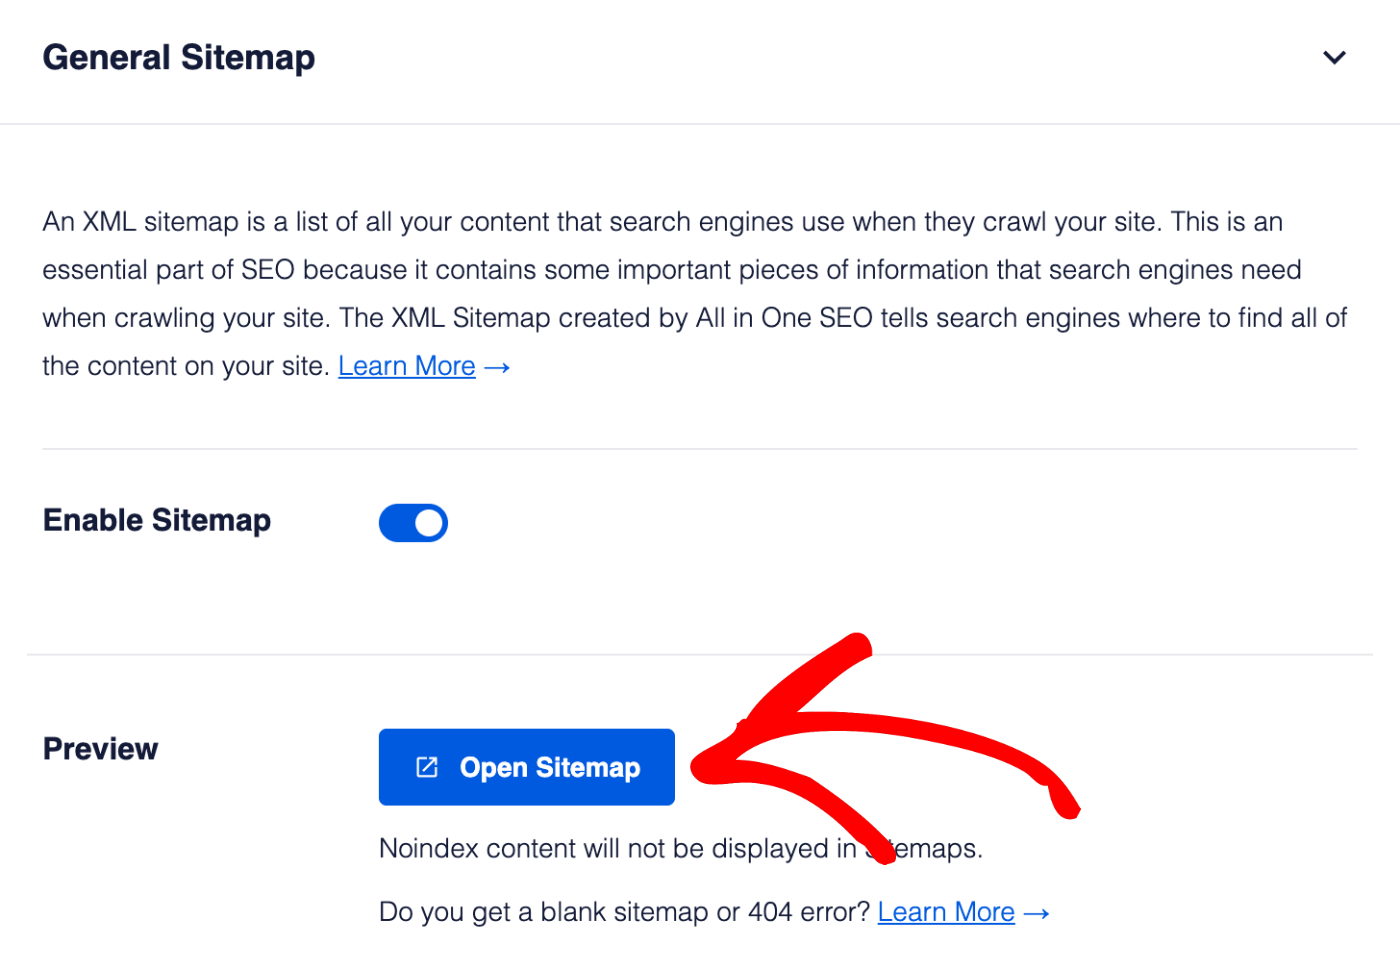 General Sitemap settings in All in One SEO